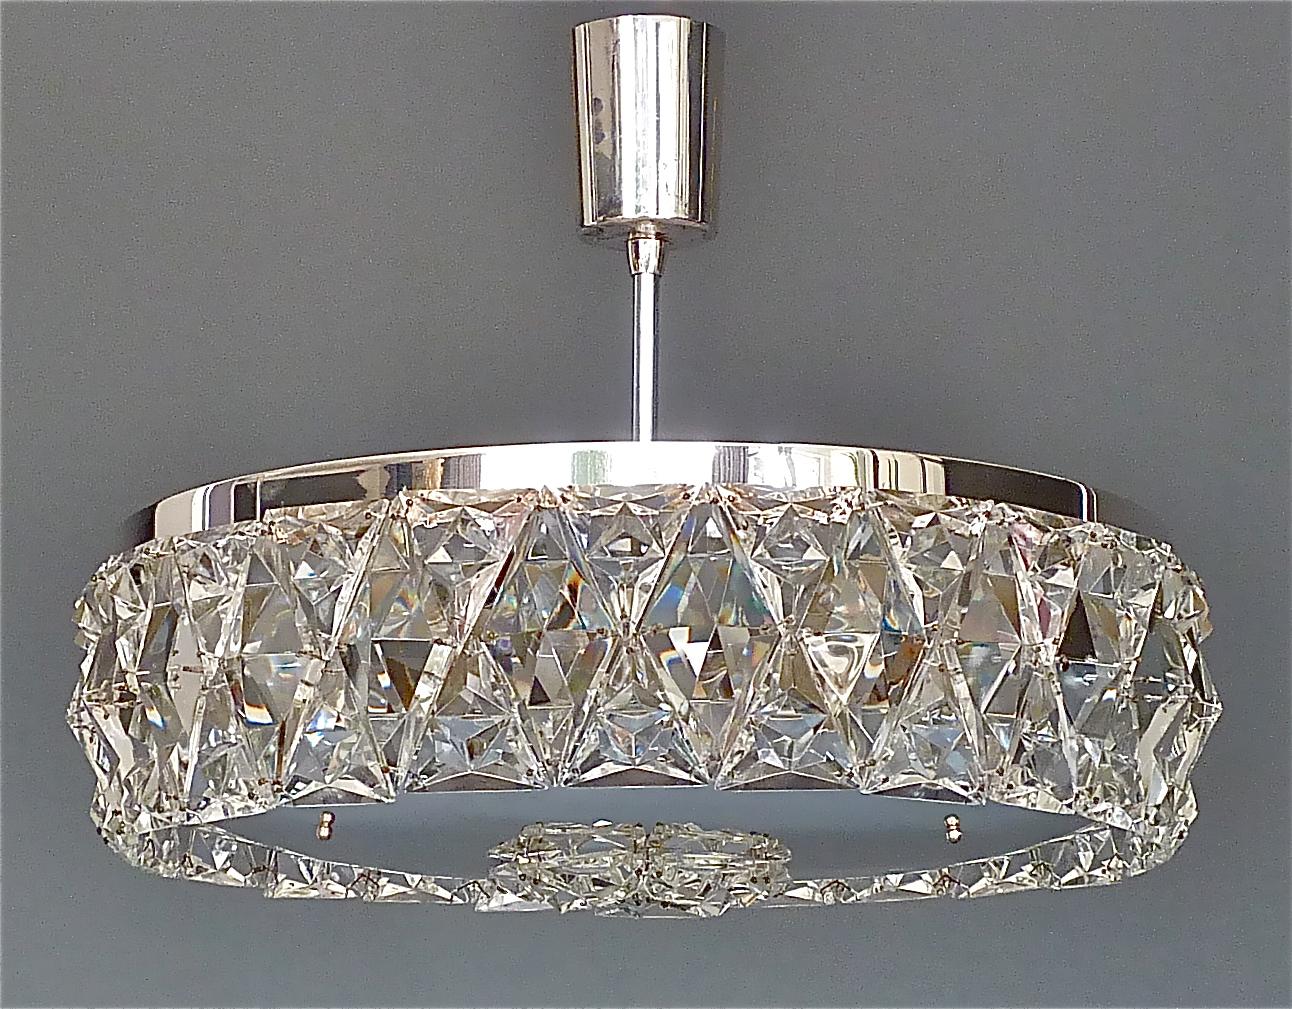 Large and early midcentury Bakalowits semi flushmount chandelier or ceiling light, Austria around 1950s. The precious chandelier is made of silver brass metal with an extraordinary faceted crystal glass ring which looks like a large sparkling